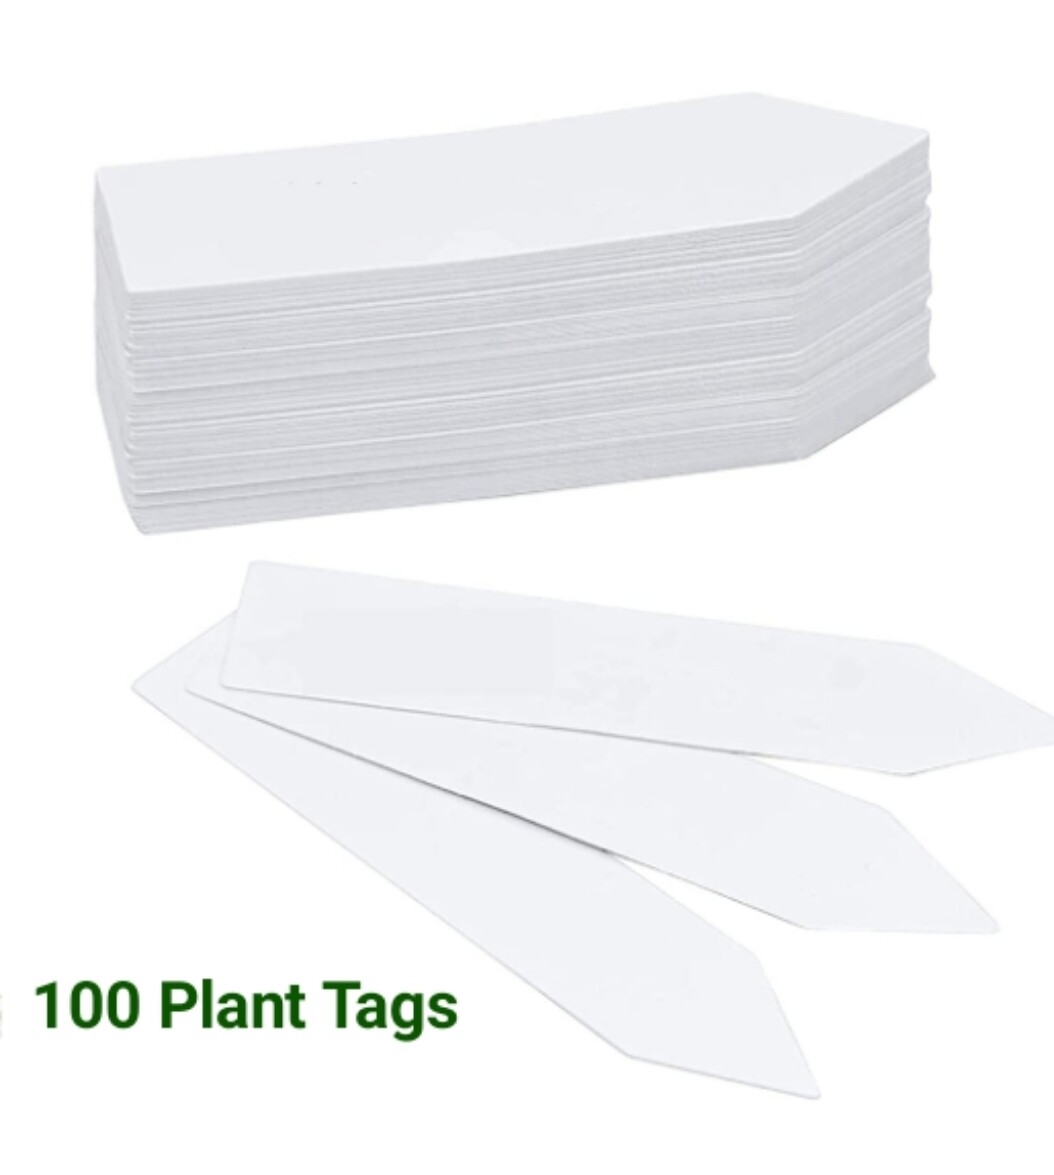 Plant Tags 100 Count